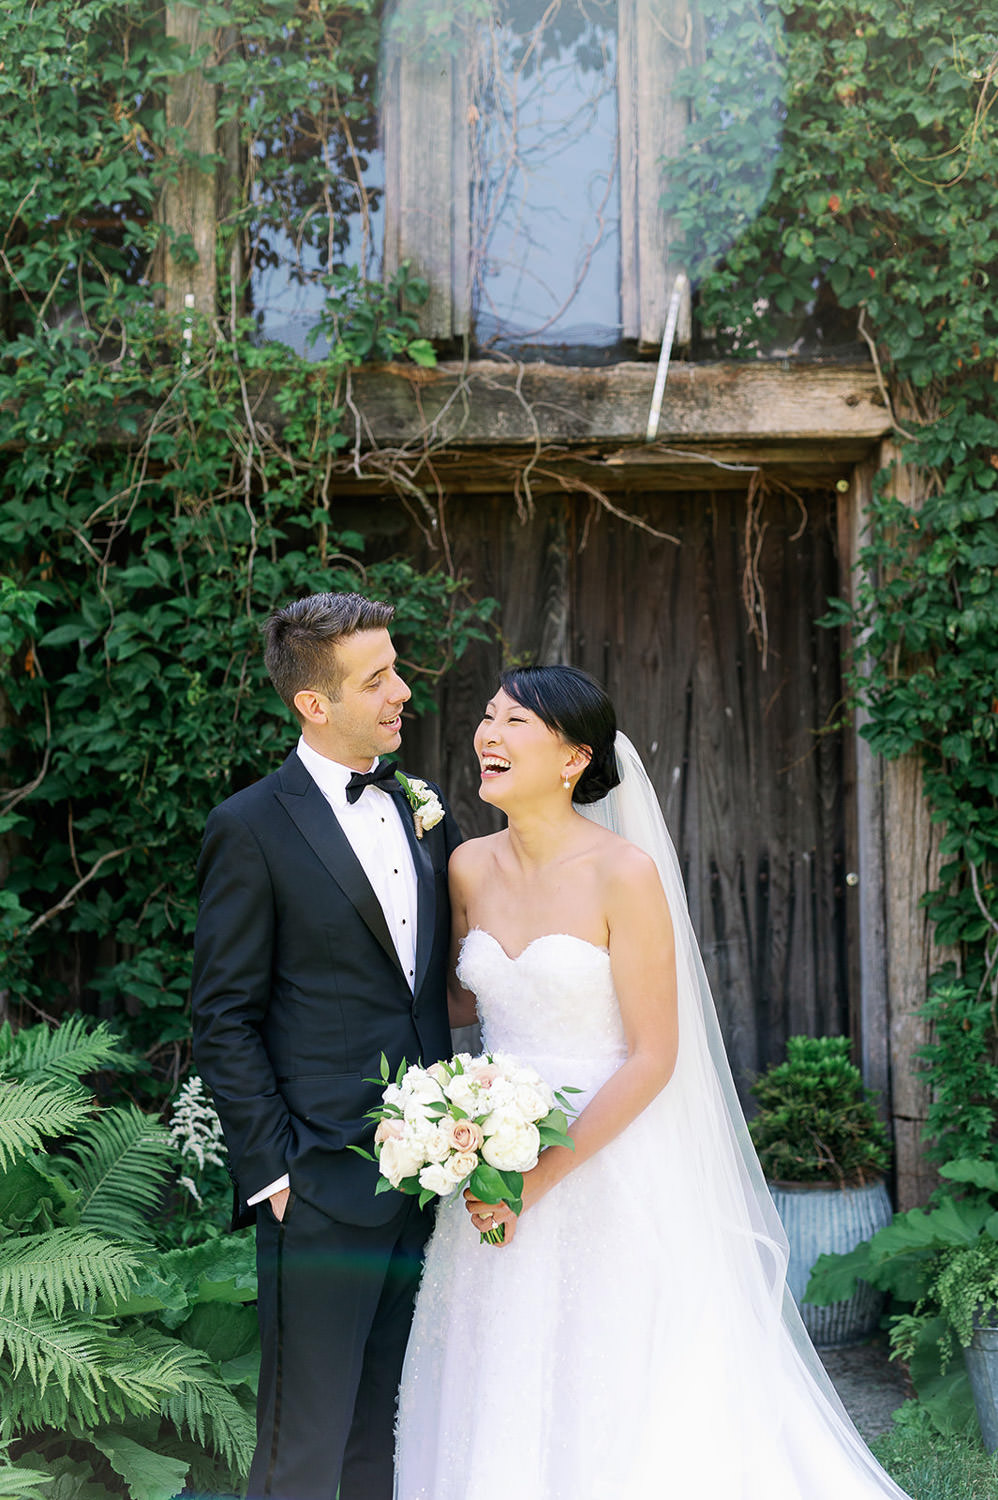 A groom and laughing bride holding a white bridal bouquet by Bedford Village Flower Shoppe